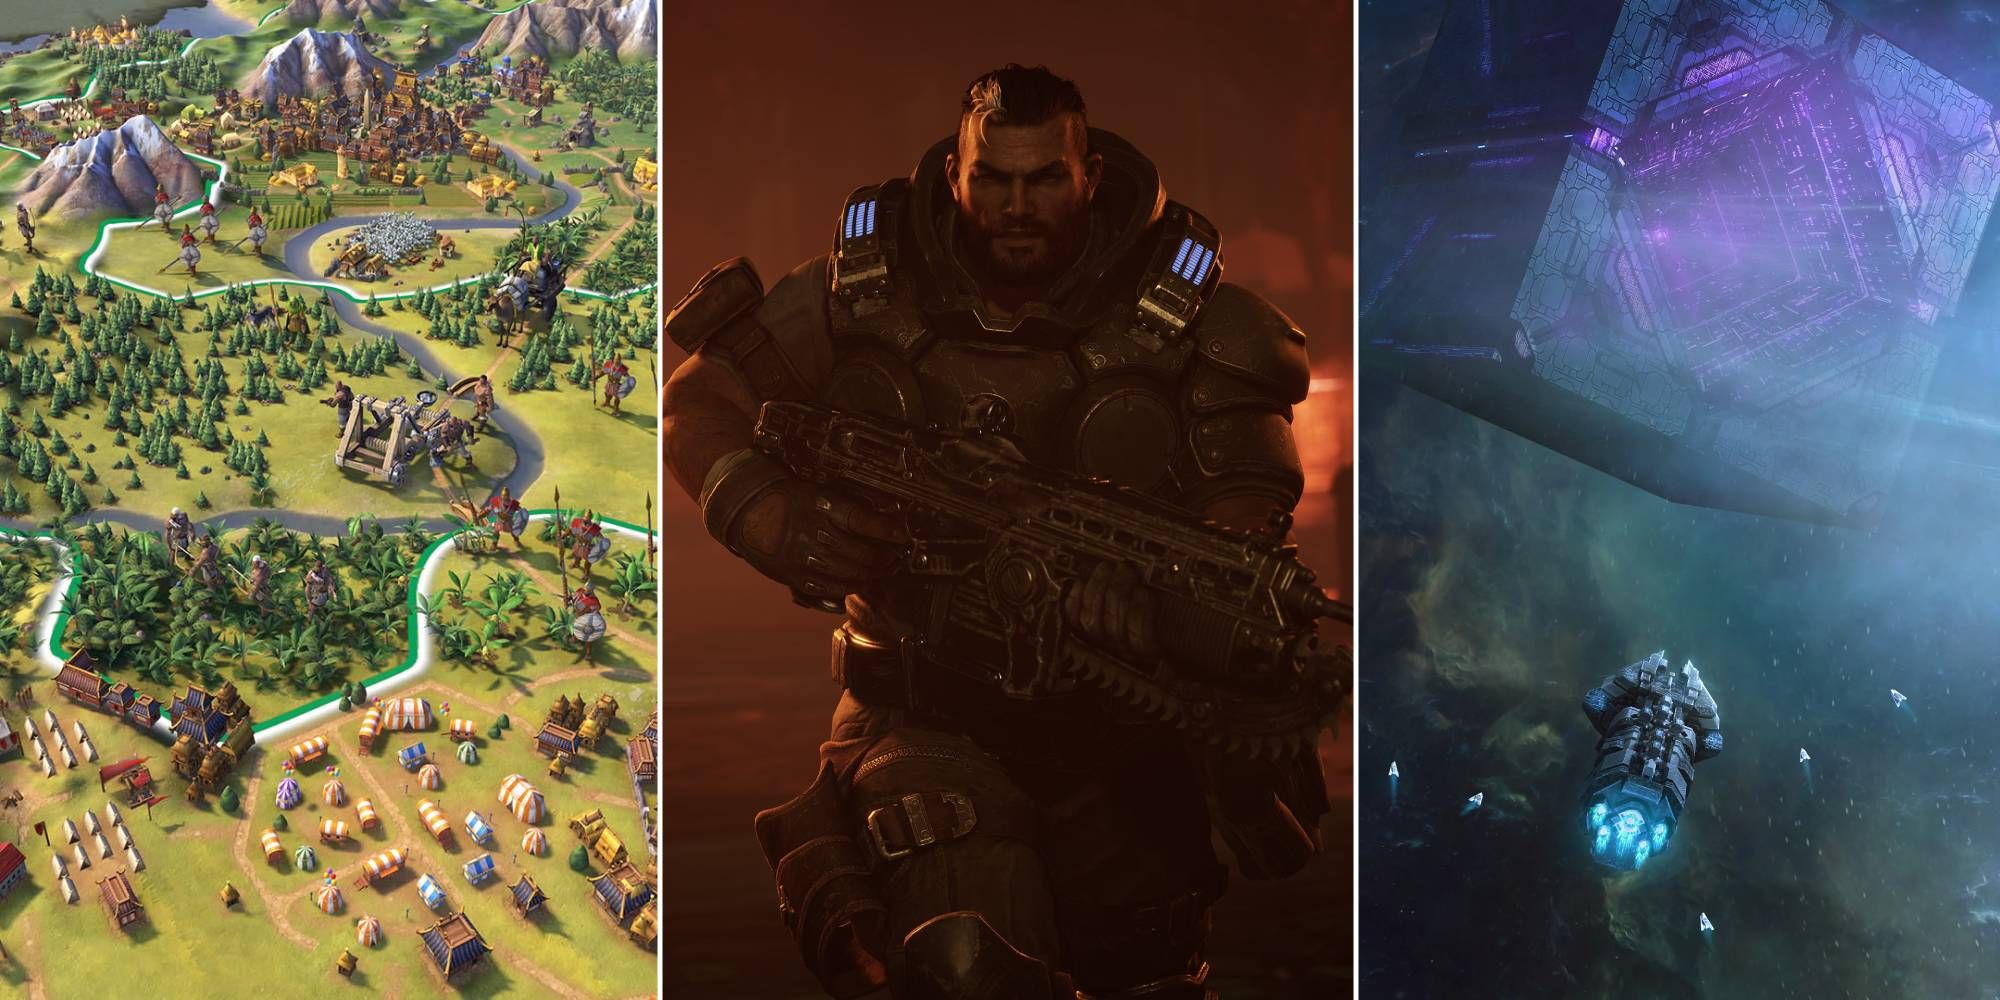 An army moves through an empire in Civ 6, a solider walks with his weapon in Gears Tactics, and a ship reaches a cube shaped station in Stellaris.